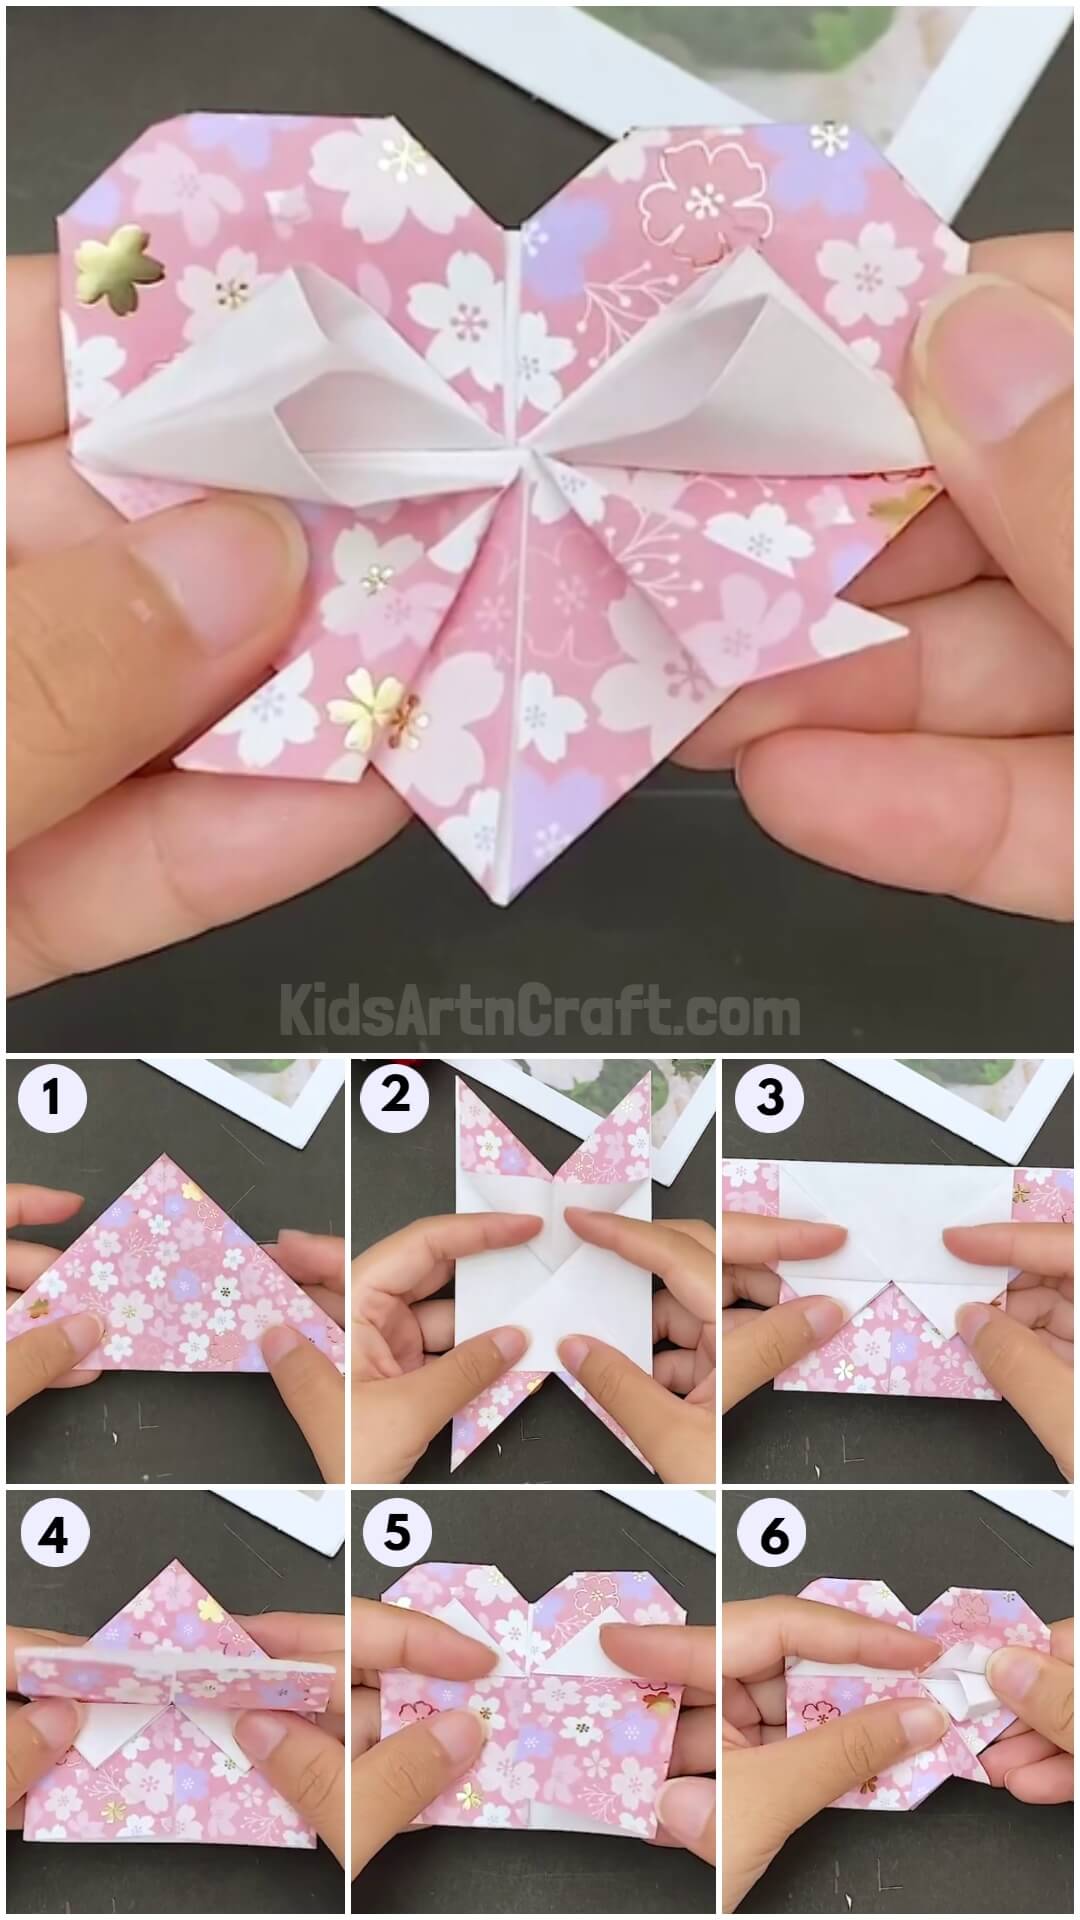 How To Make Origami Heart Envelope Step-by-step Tutorial